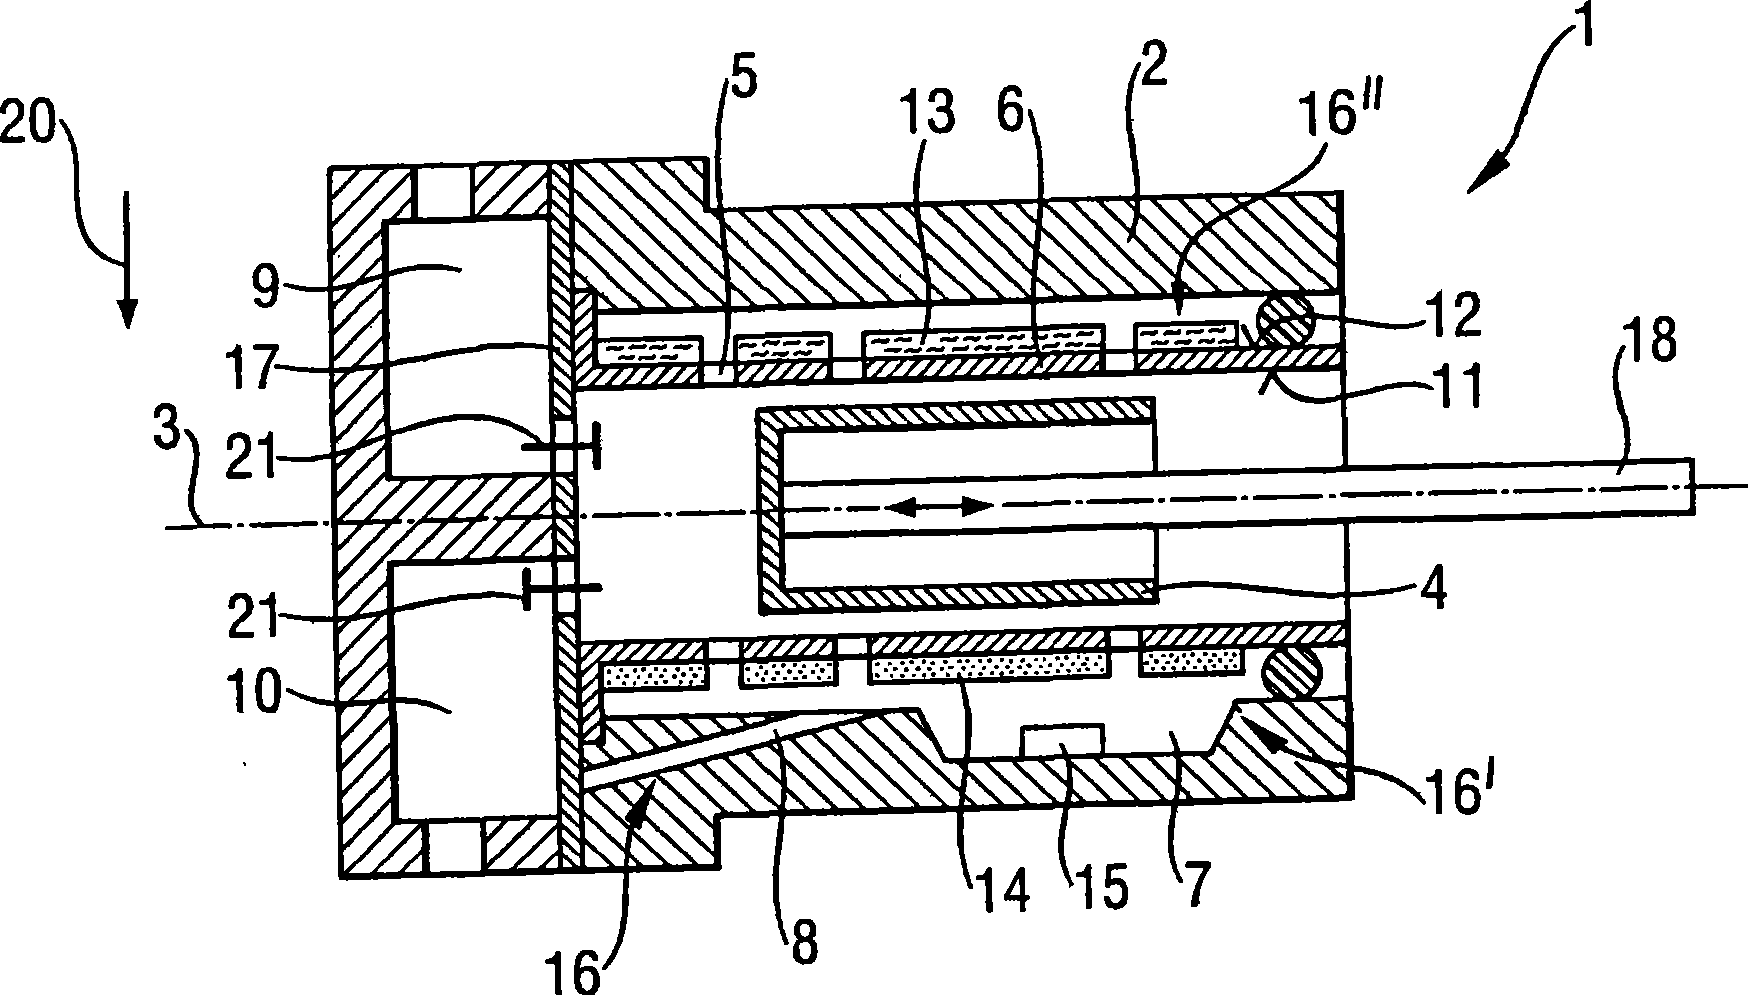 Linear compressor or refrigerating unit comprising a discharge device for fluid condensate